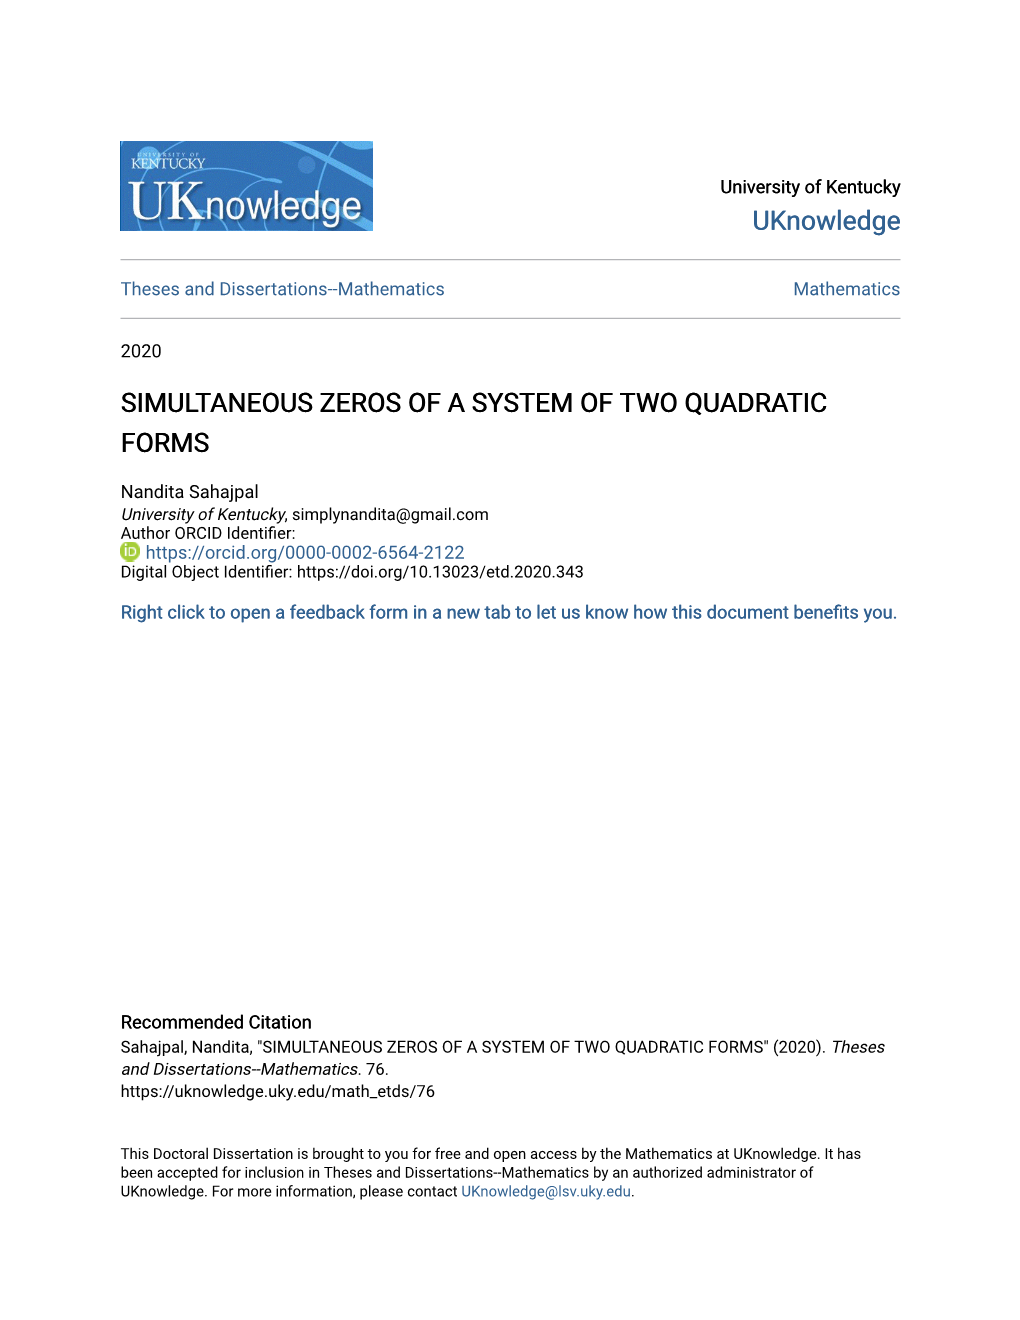 Simultaneous Zeros of a System of Two Quadratic Forms